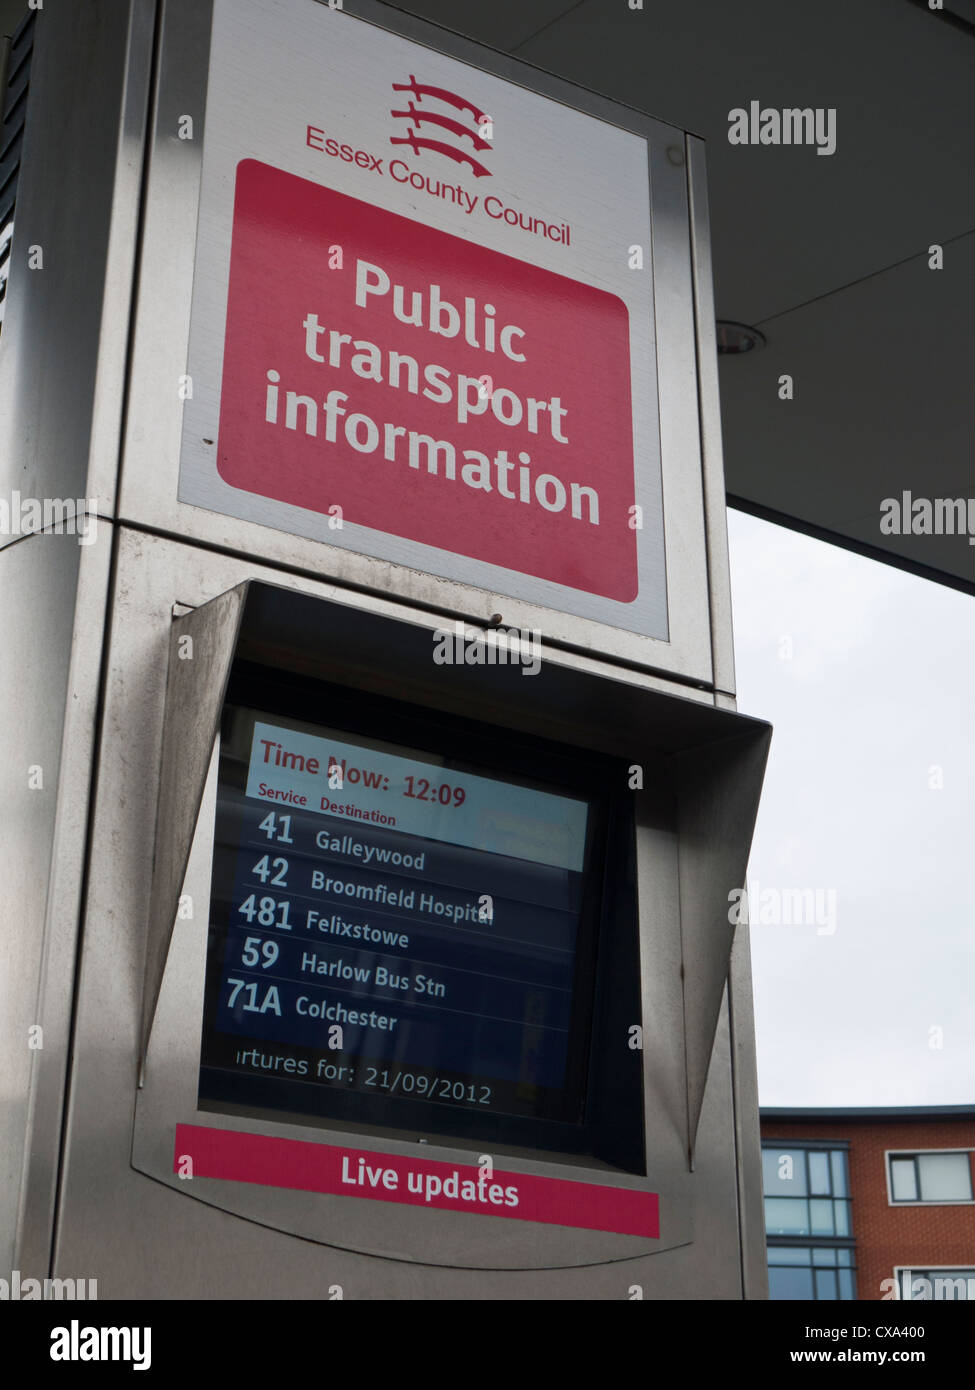 Public transport information display operated by Essex County Council in Chelmsford, Essex Stock Photo